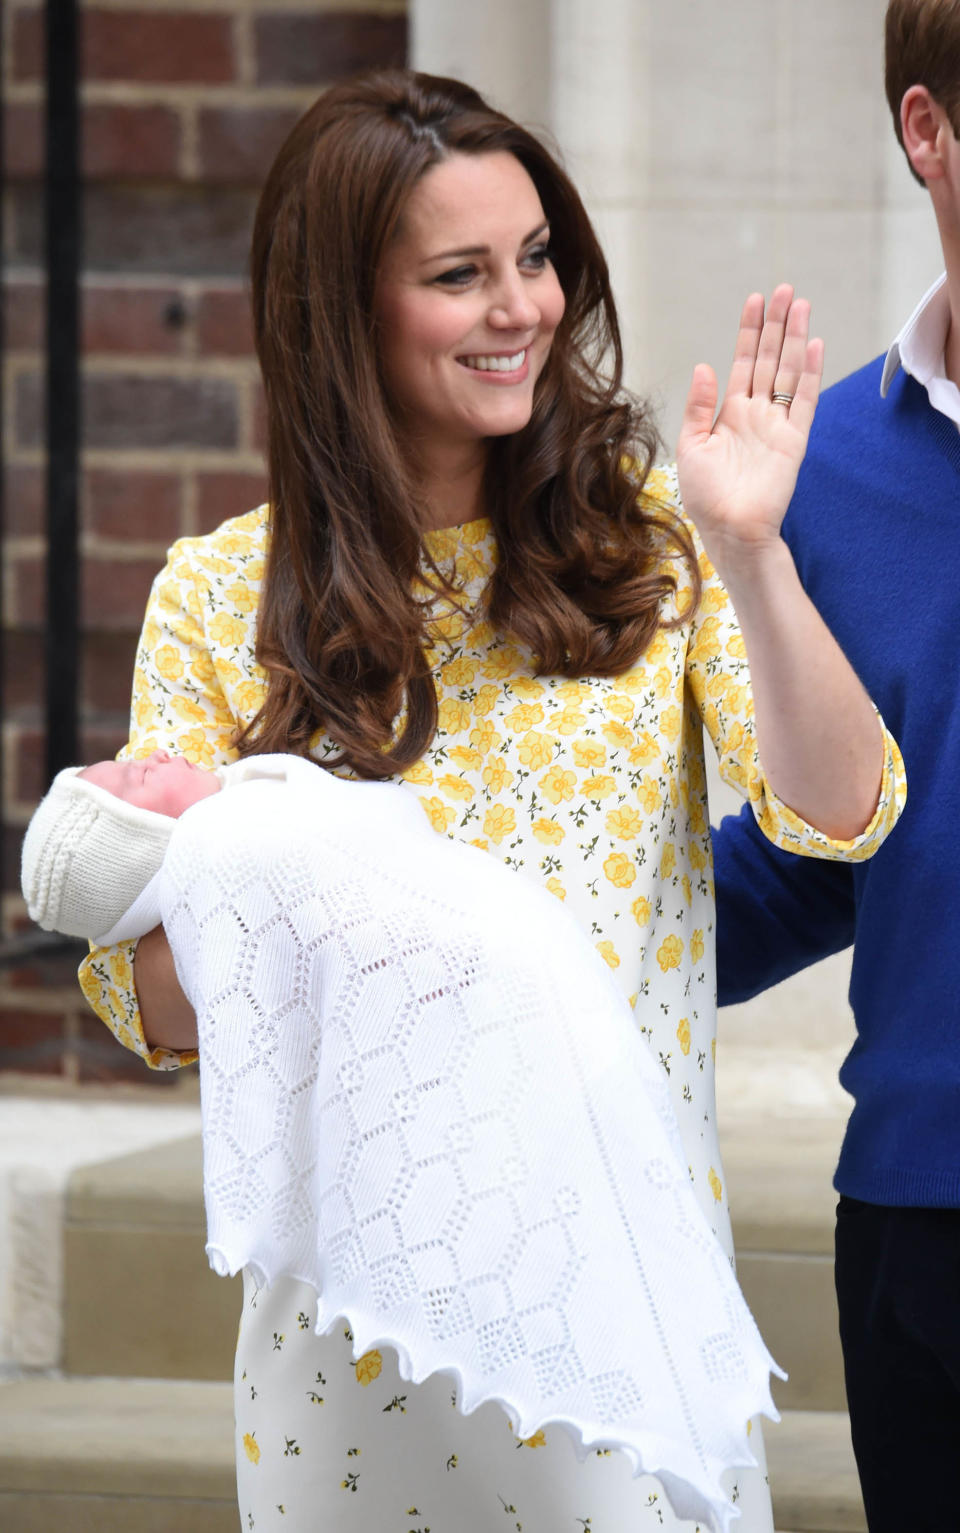 Photo by: KGC-03/STAR MAX/IPx 5/2/15 The Princess of Cambridge is seen outside the Lindo Wing of St. Mary's Hospital with her parents Prince William The Duke of Cambridge and Catherine The Duchess of Cambridge.  The Princess was born on Saturday, May 2nd, 2015 at 8:34 AM weighing 8lbs. 3oz. (Star Max/IPX via AP Images)